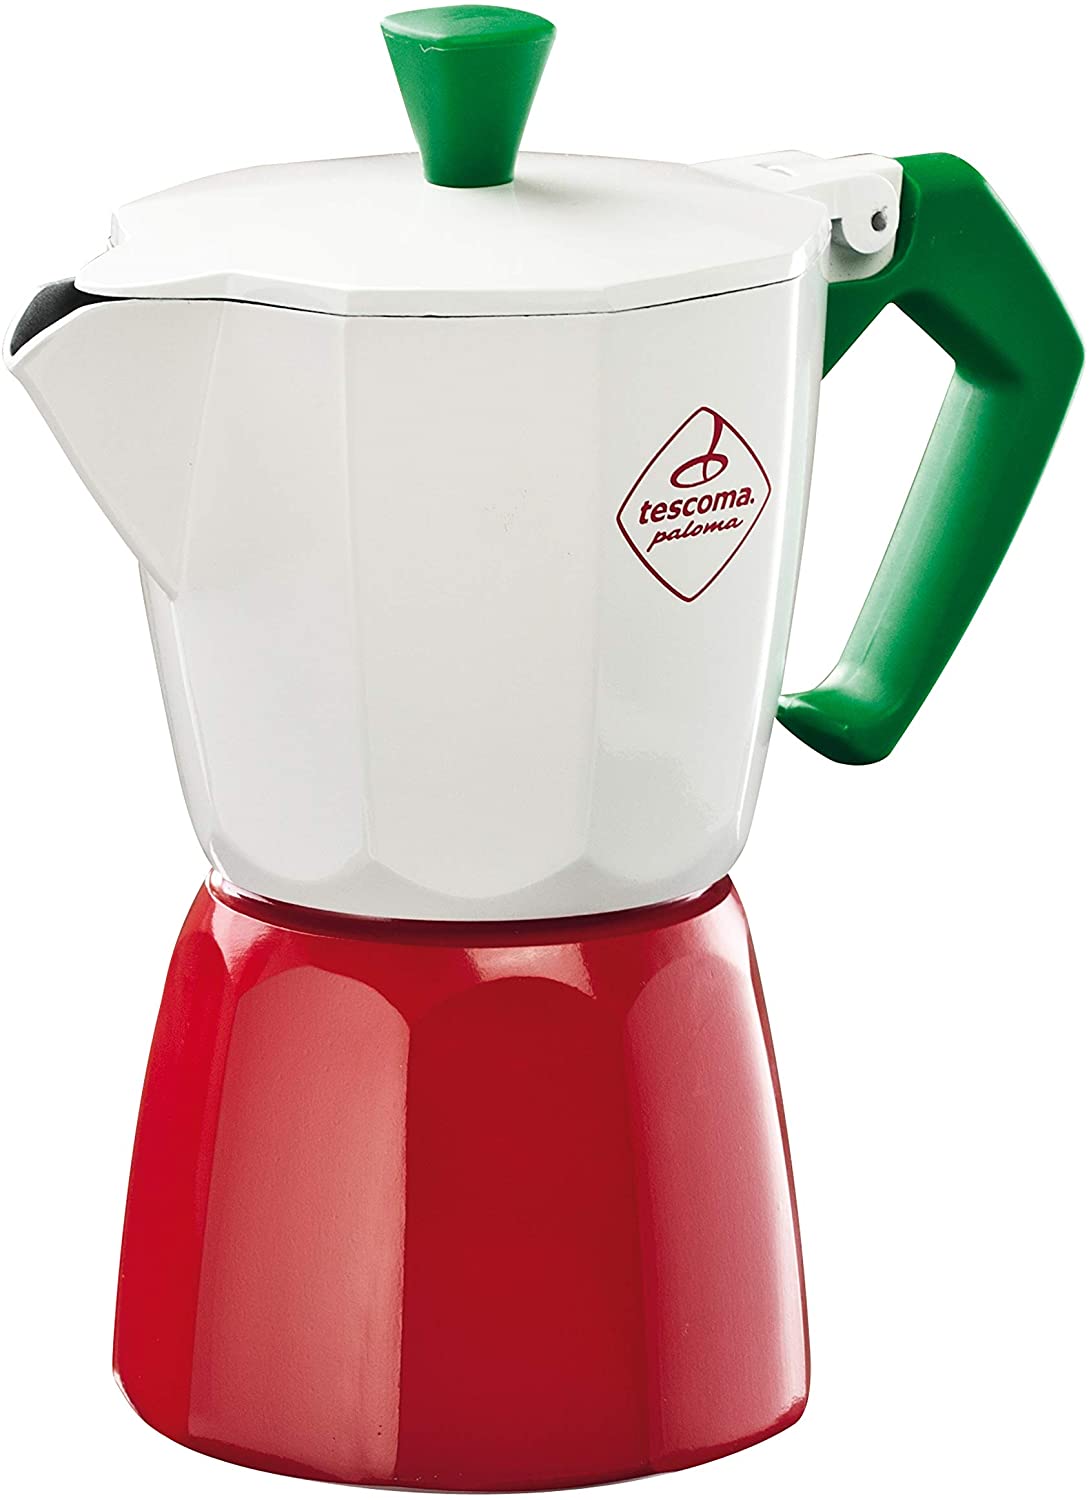 Tescoma Paloma Coffee Maker 6 Cups Tricolore 17.7 x 10.3 x 20.5 cm, White/Green/Red)